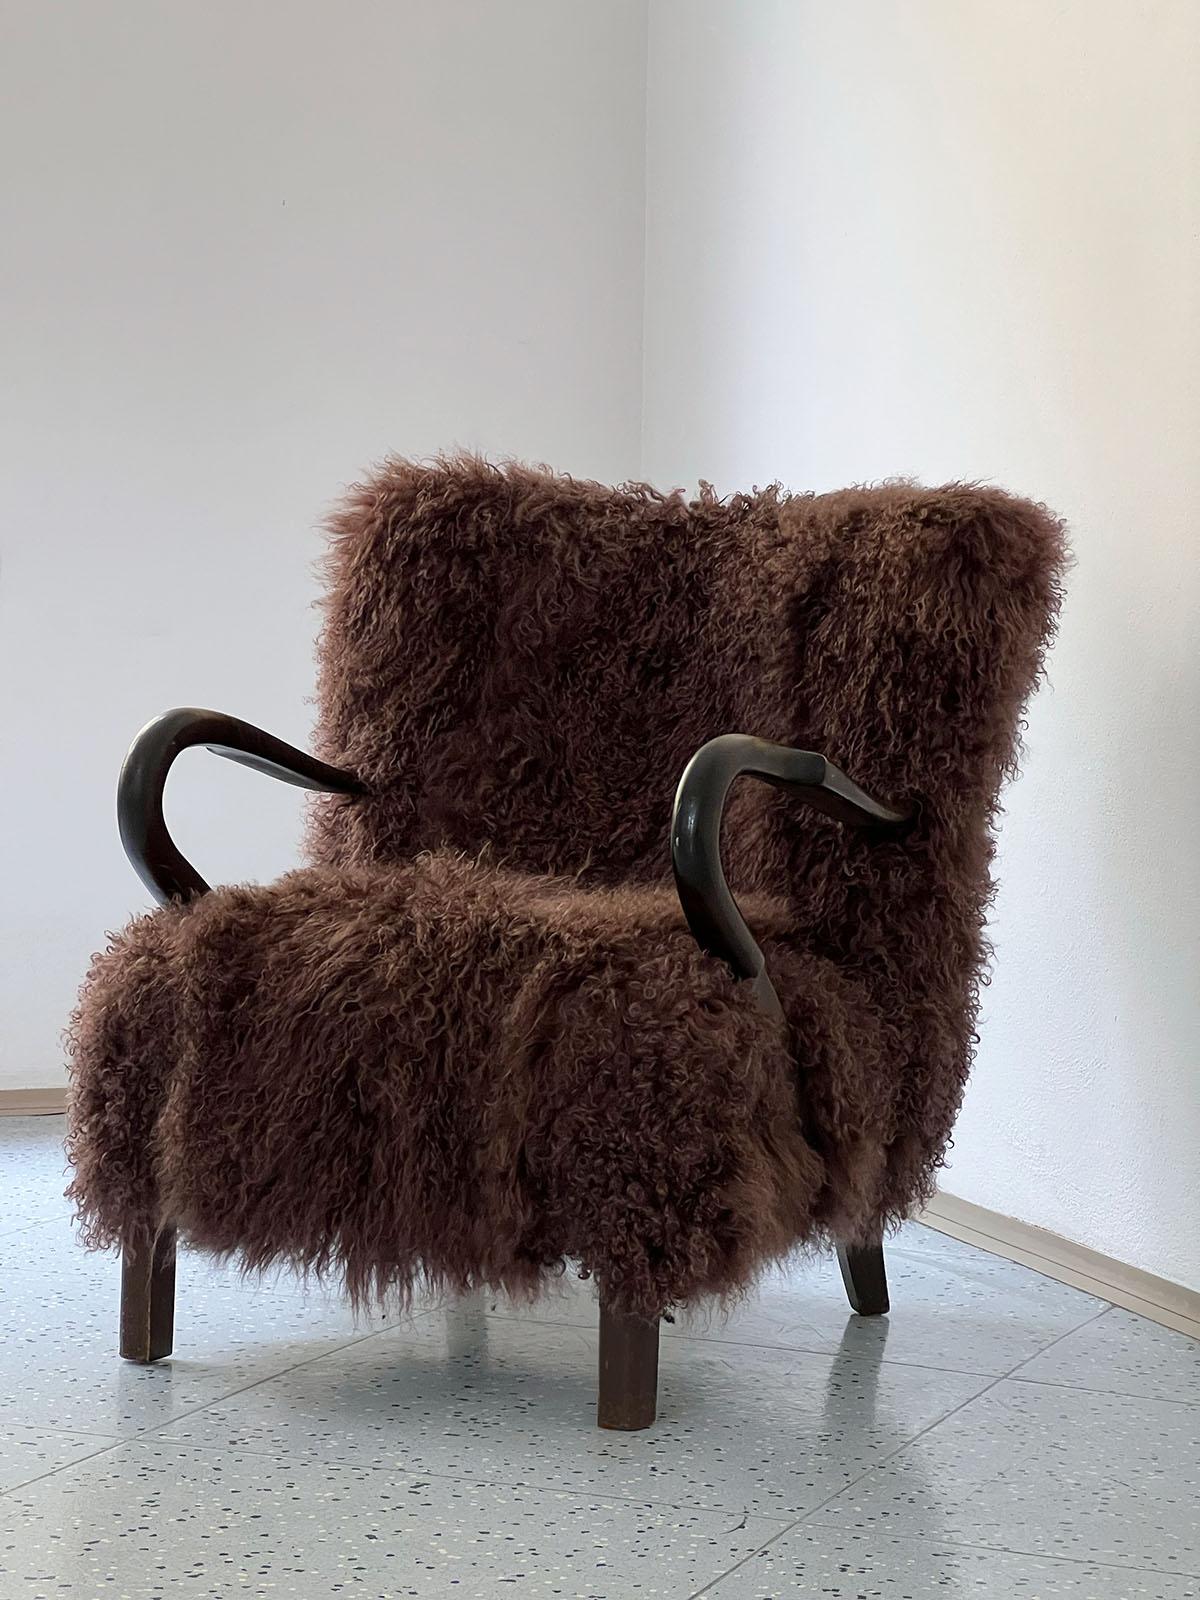 Scandinavian wooden lounge chair, made in Sweden in the 1940s and newly upholstered in brown Tibetan wool.

The lounge chair features beautifully curved armrests which blend perfectly with the brown Tibetan wool upholstery, giving the chair a